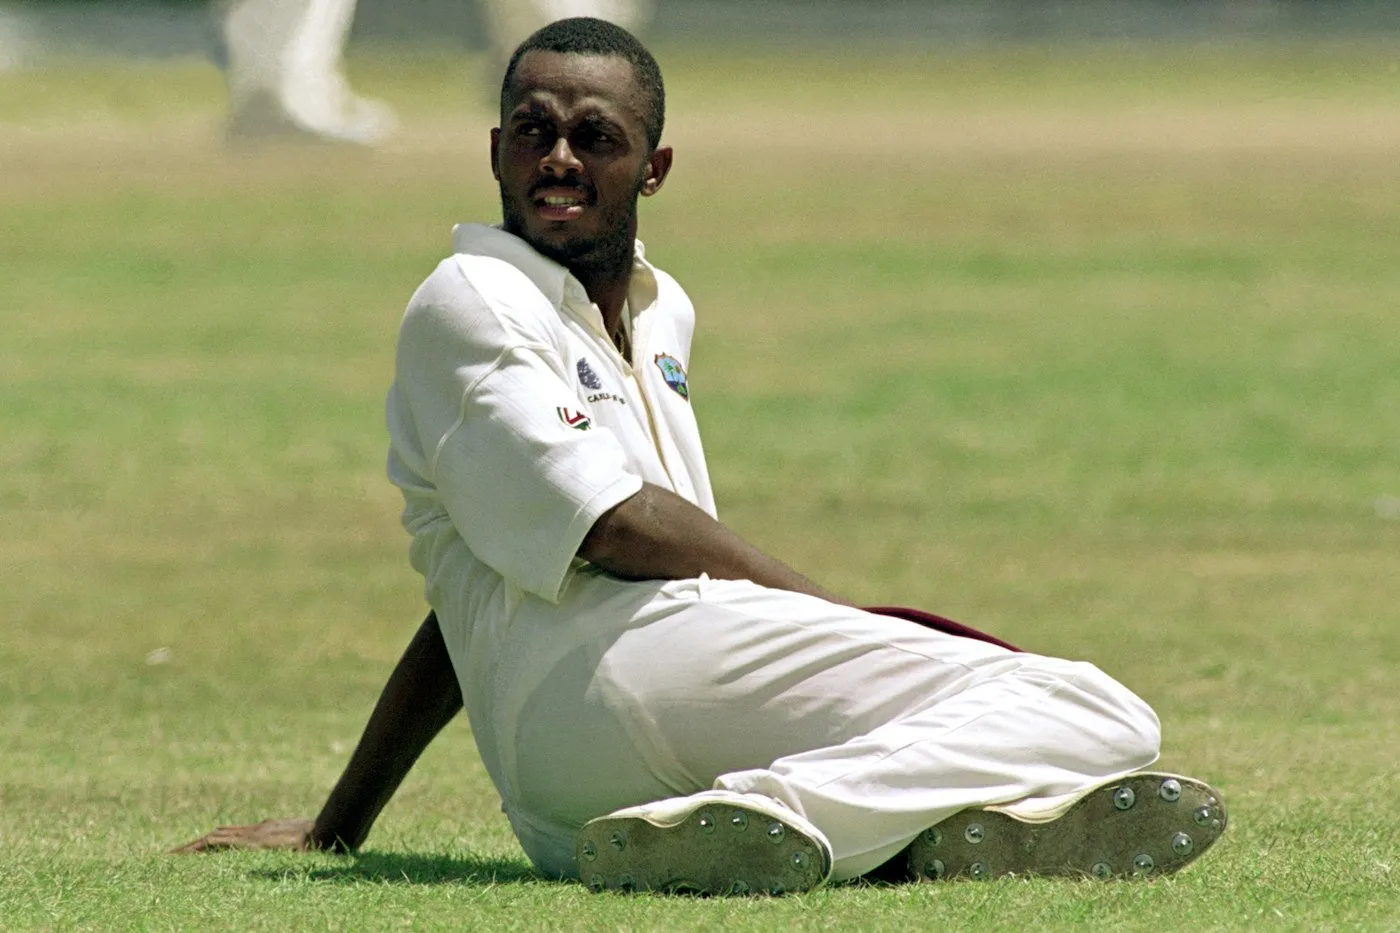 Courtney Walsh. Image- The Cricket Monthly  Ross Setford - EMPICS